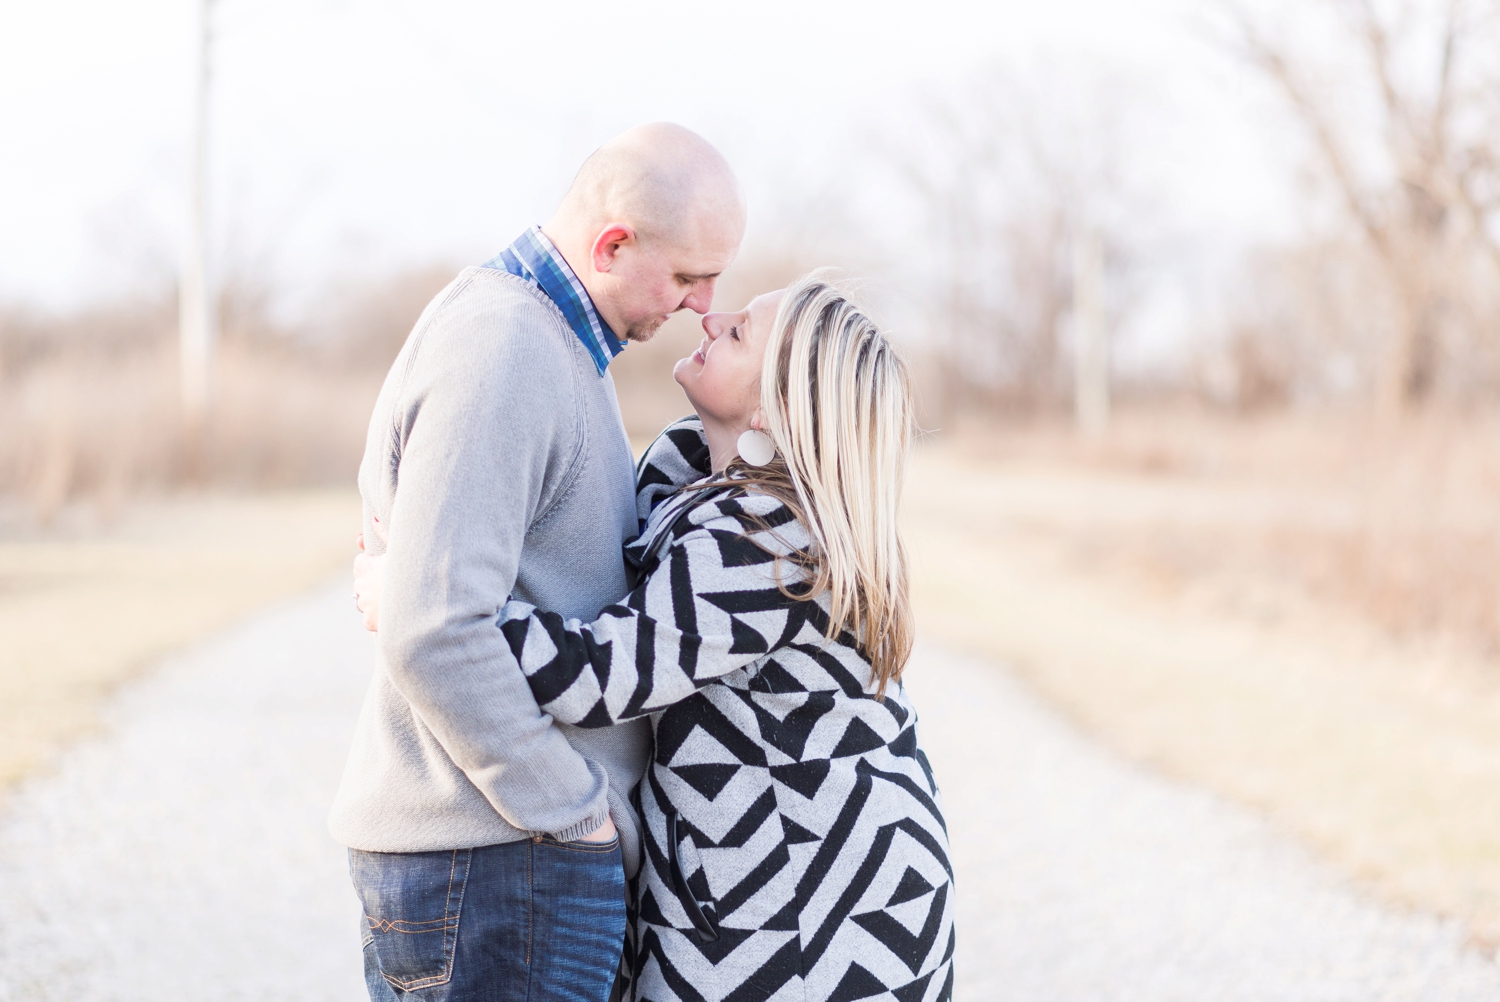 winter-engaged-couple-at-their-photo-session-at-the-scioto-audubon-park-near-grange-audubon-center-with-walkways-and-grass_0348